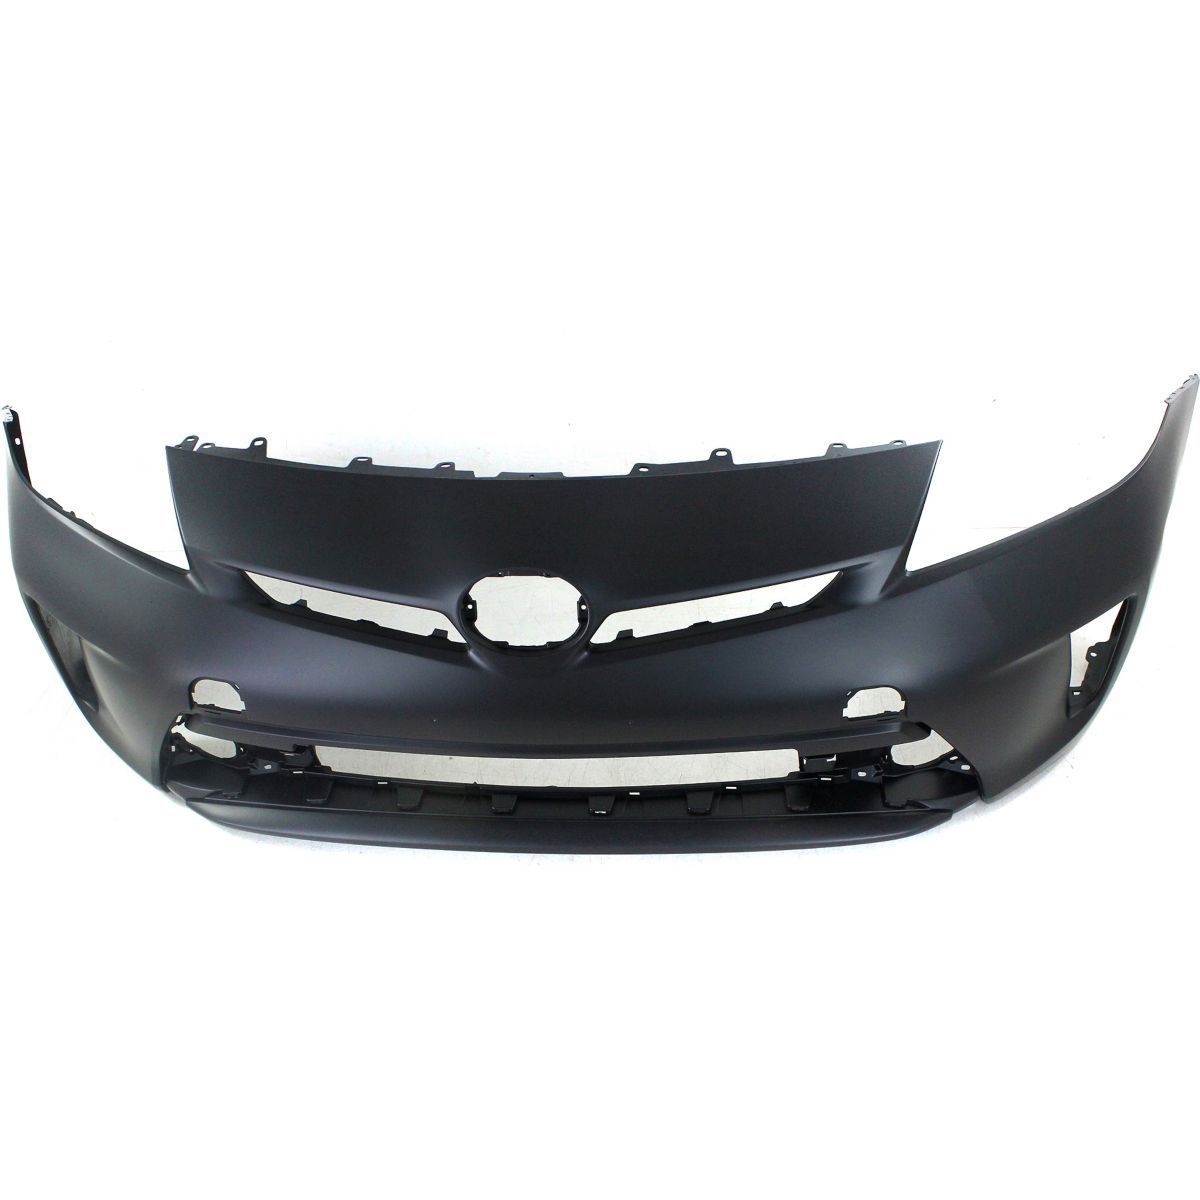 Toyota Prius 2012 - 2015 Front Bumper Cover 12 - 15 TO1000394 Bumper-King